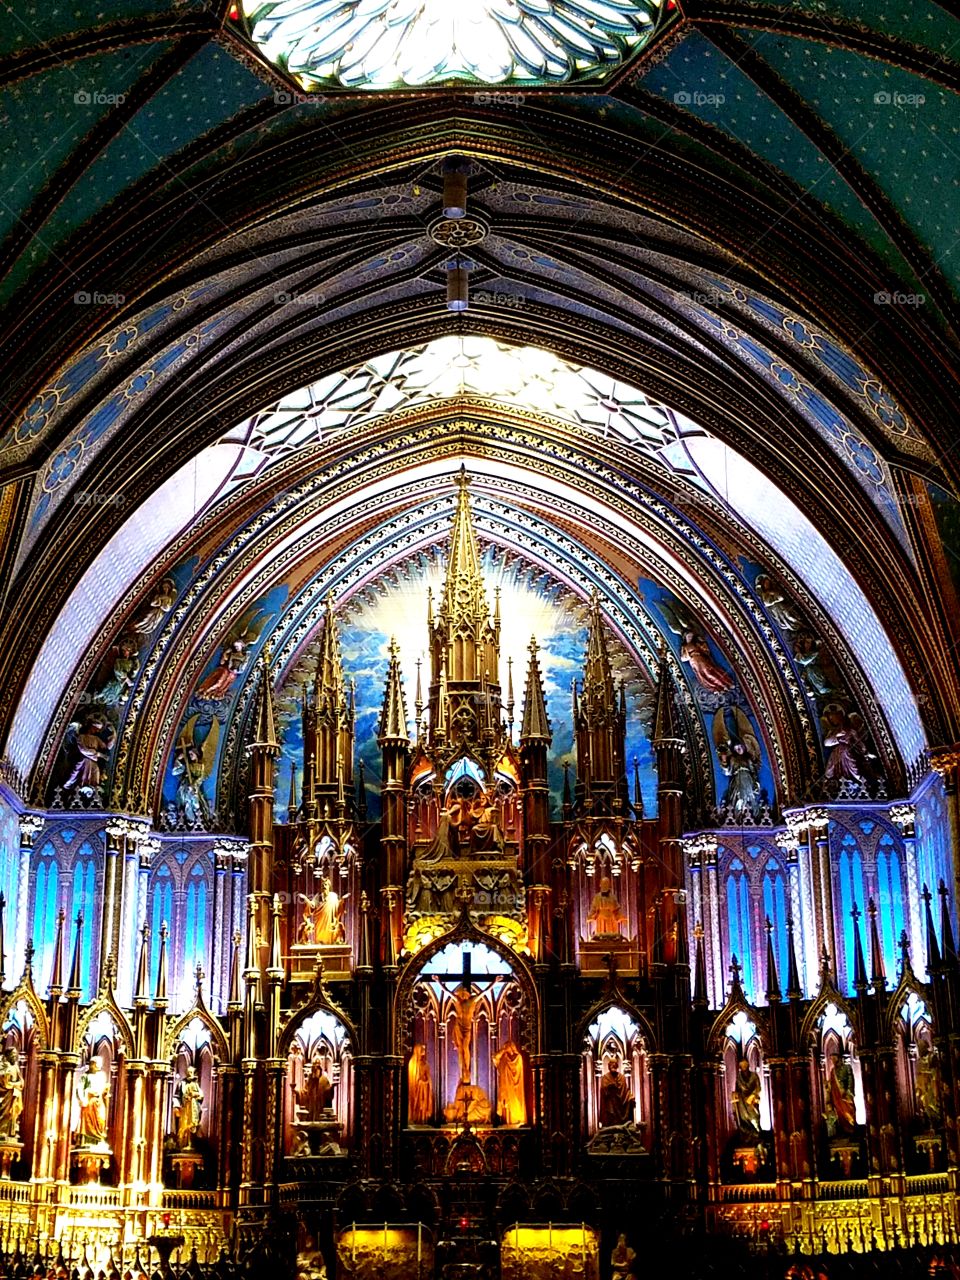 Beautiful Architecture inside of a Church in Montreal, Canada